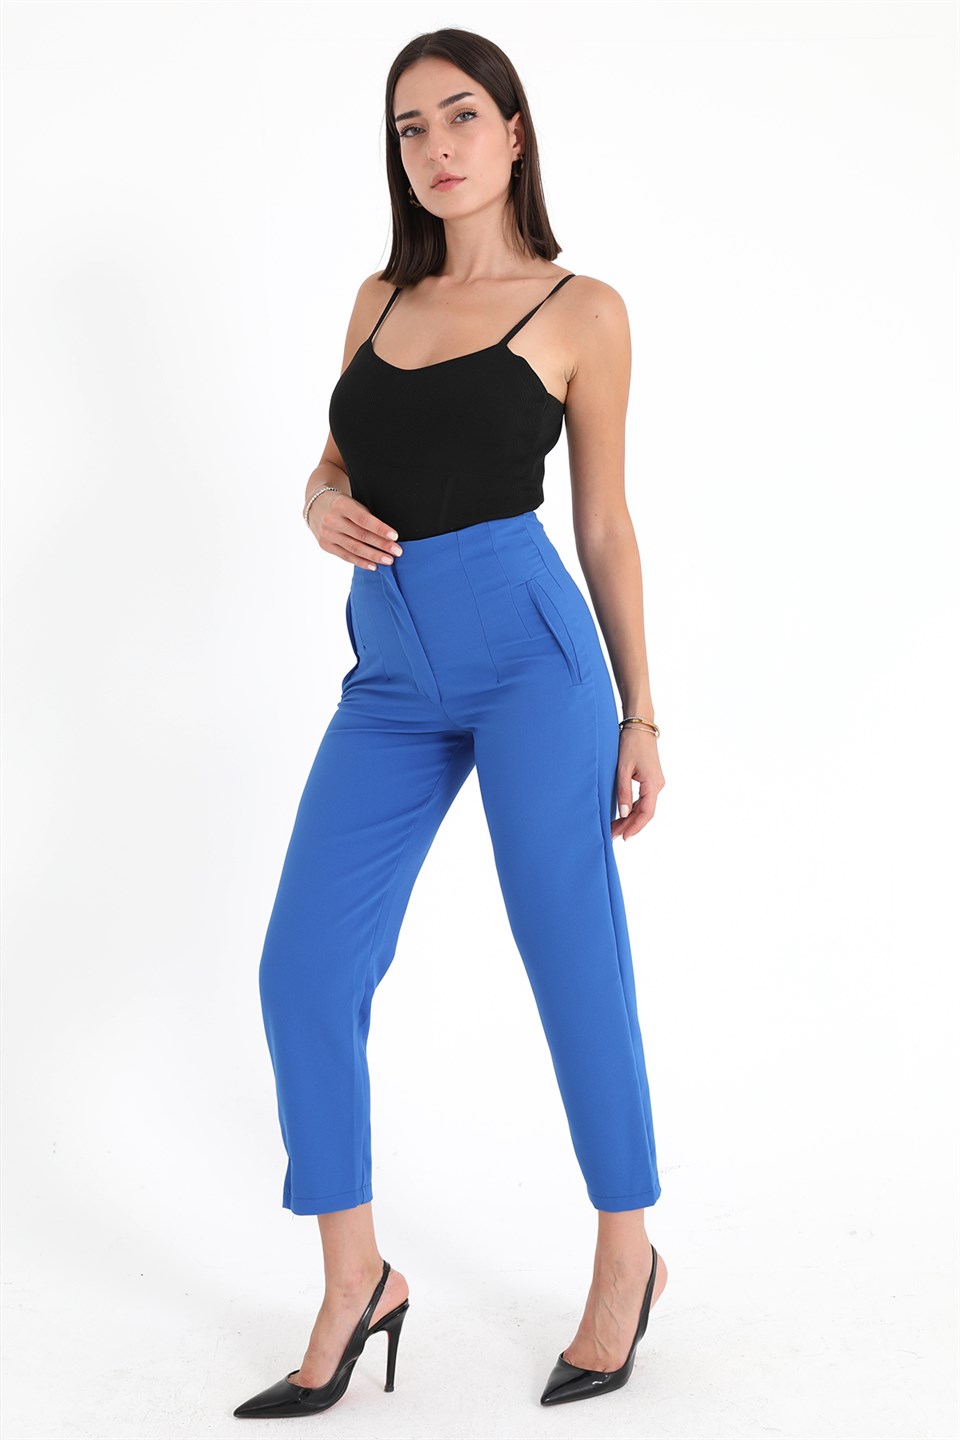 Women's High Waist Stretched Atlas Fabric Trousers - Sax Blue - STREETMODE™